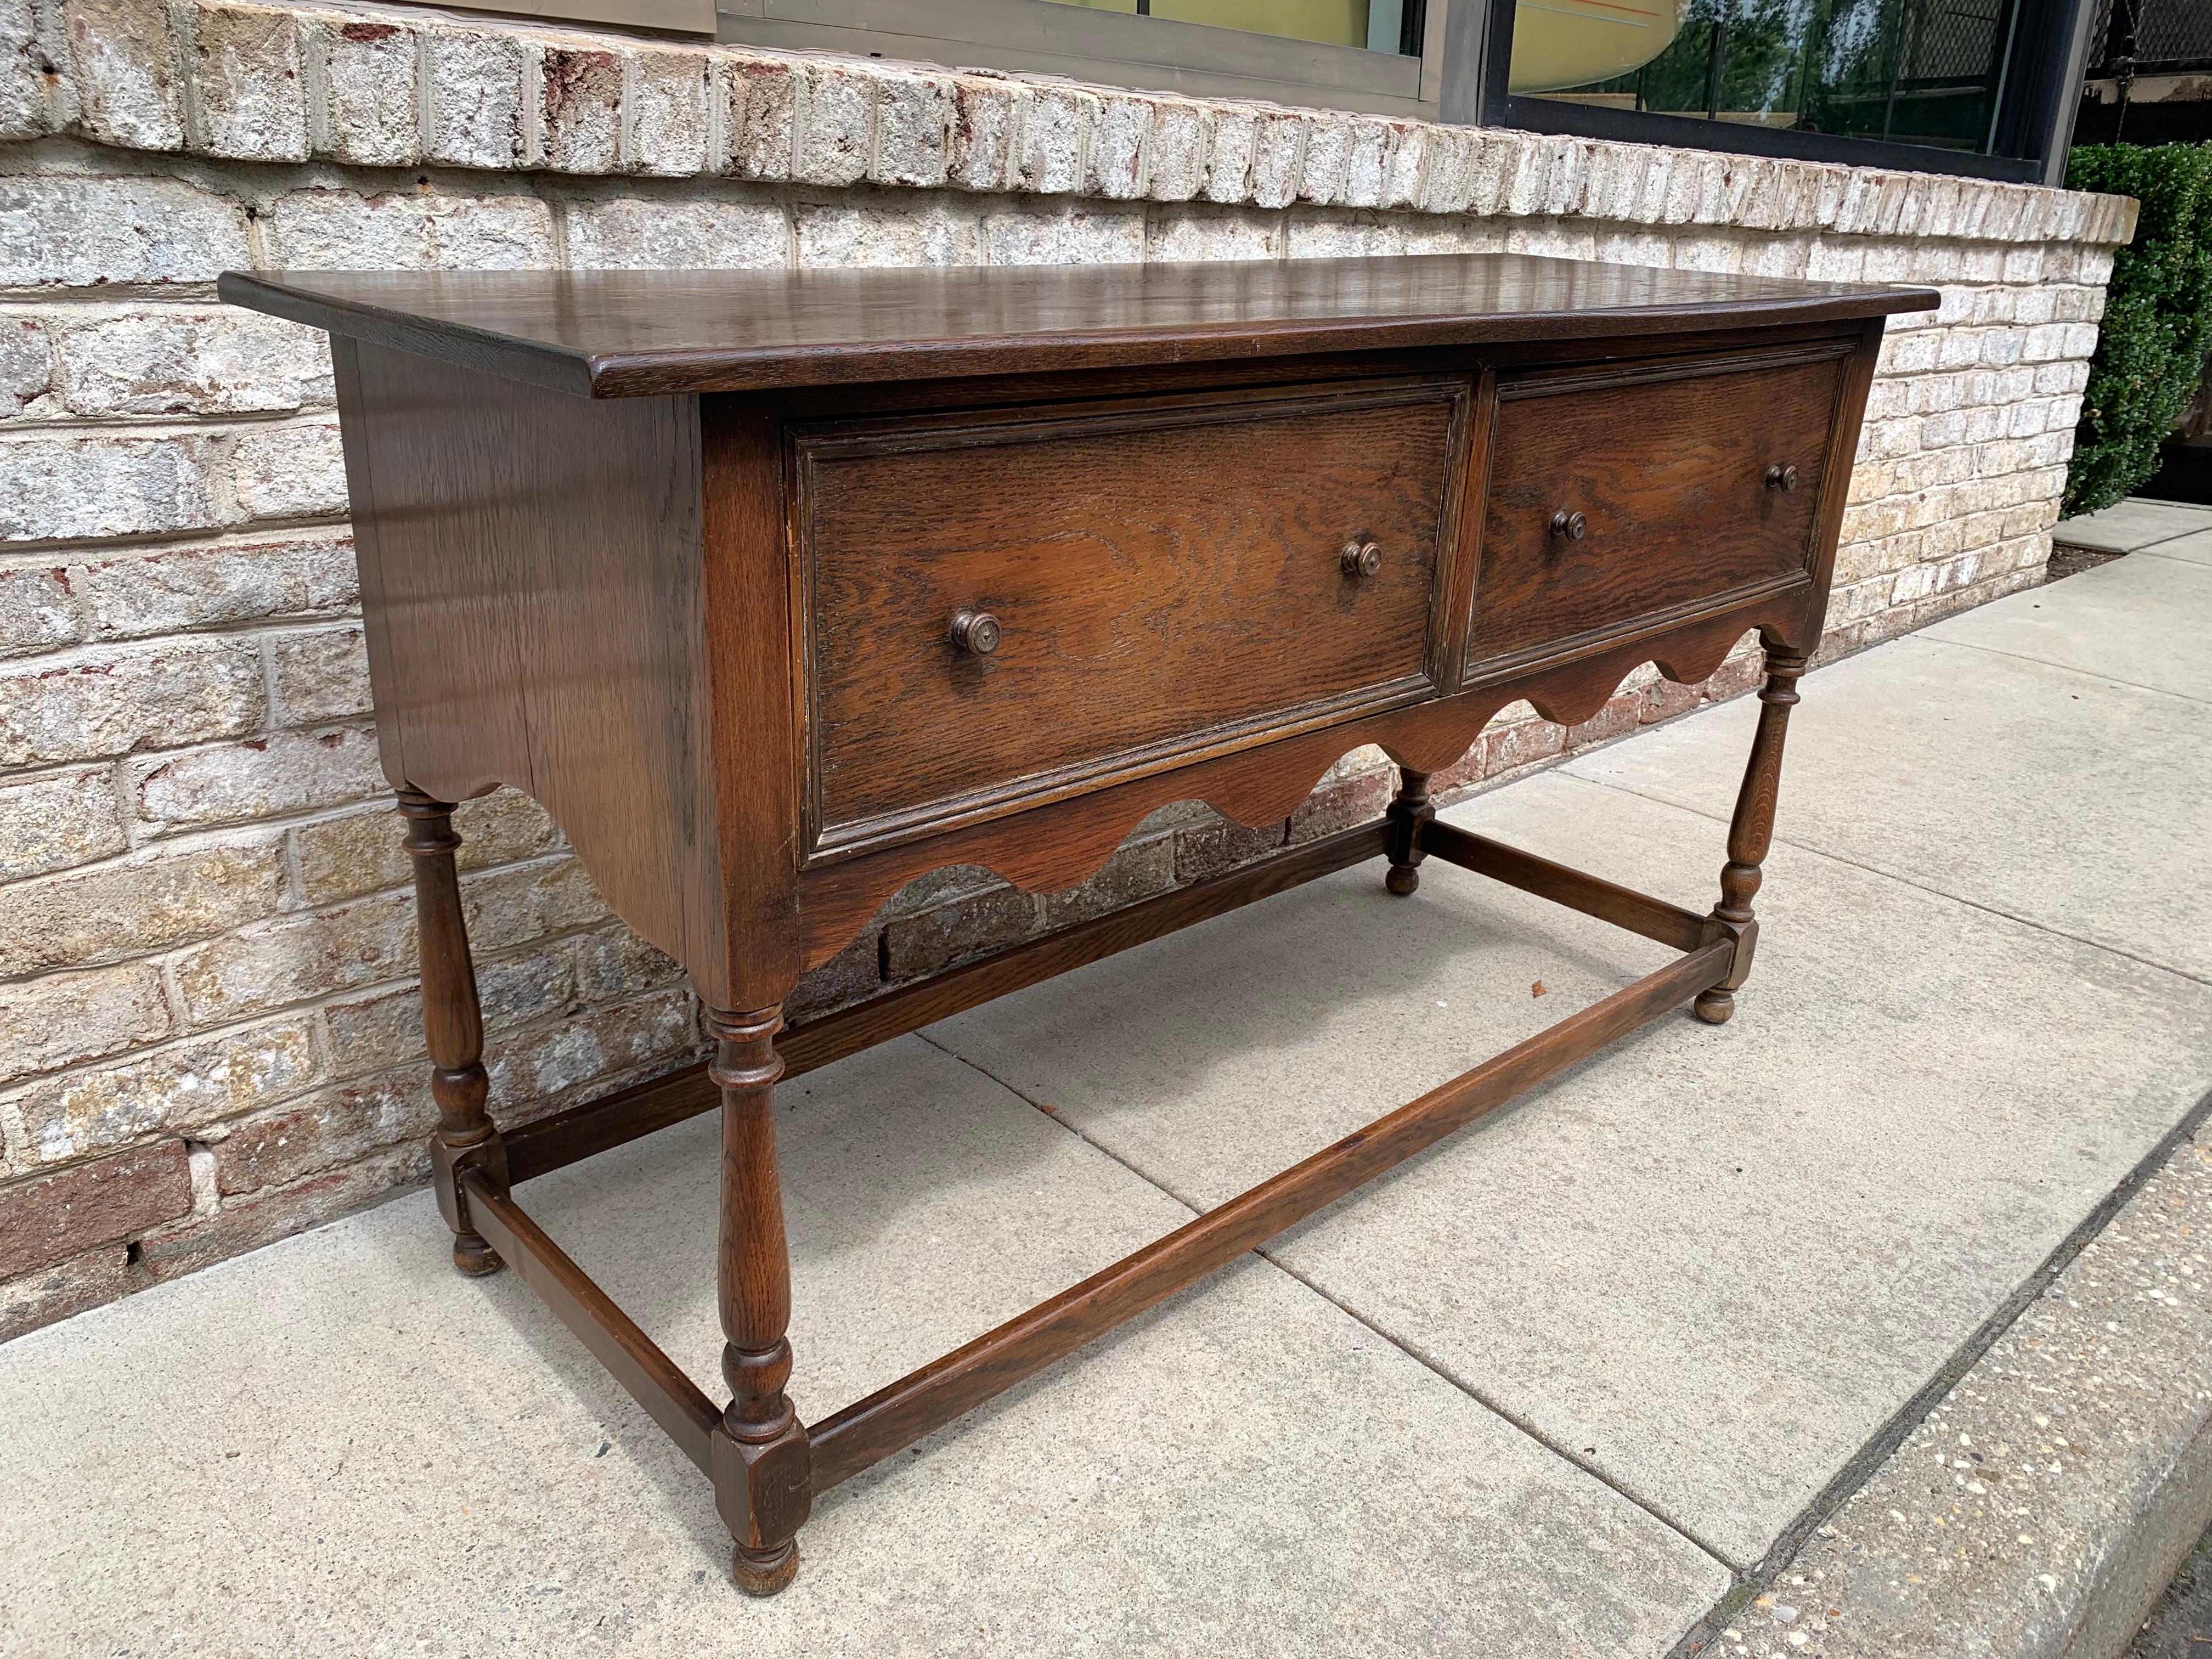 With two large drawers for storage and many wonderful details such as butterfly inlay to top, spindle legs and stretchers. This beauty is a very early Kittinger creation.